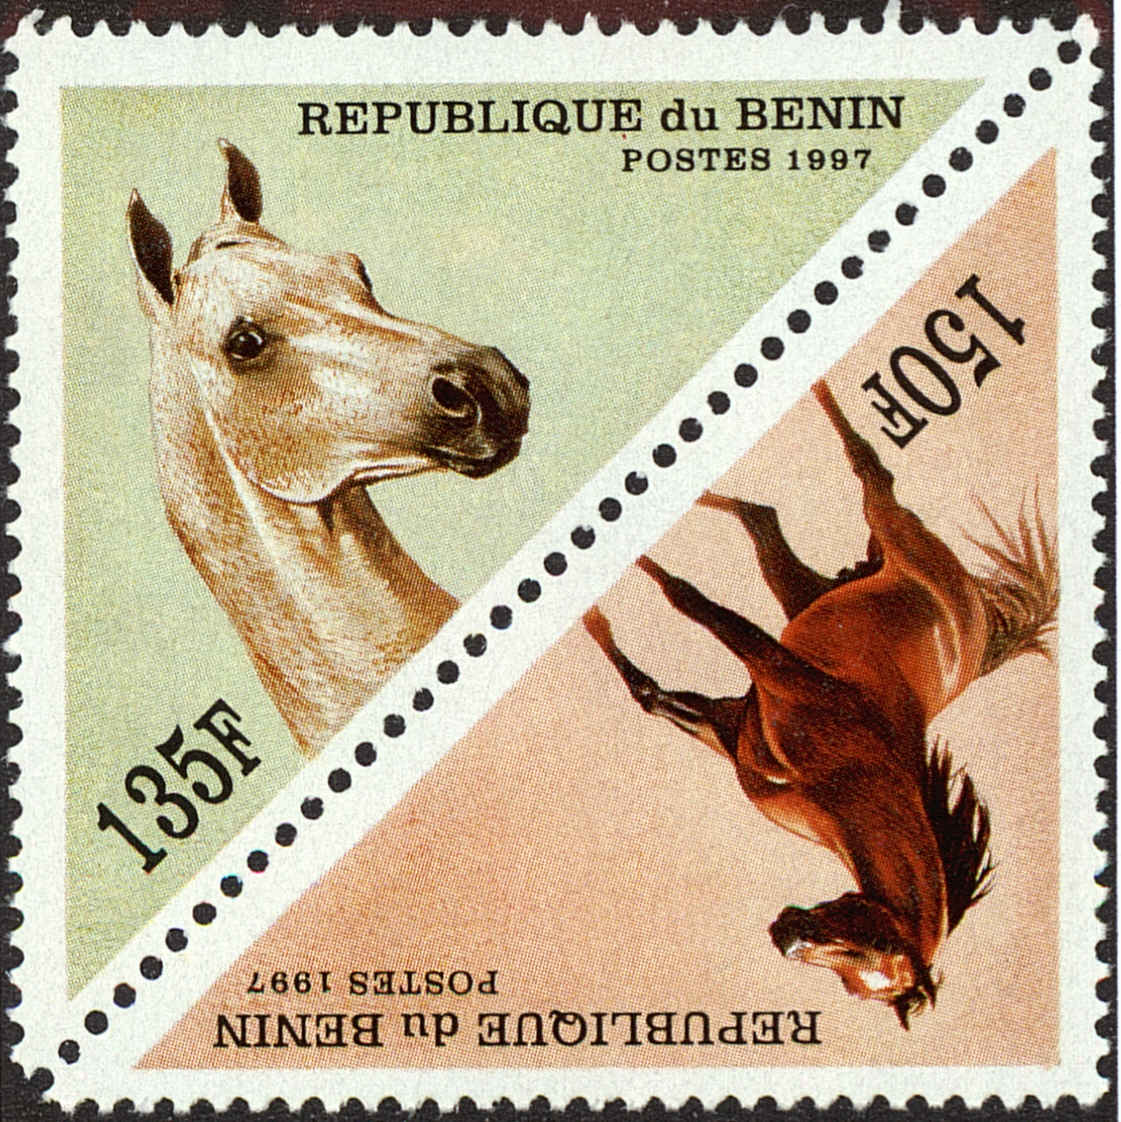 Front view of Benin 1053A collectors stamp